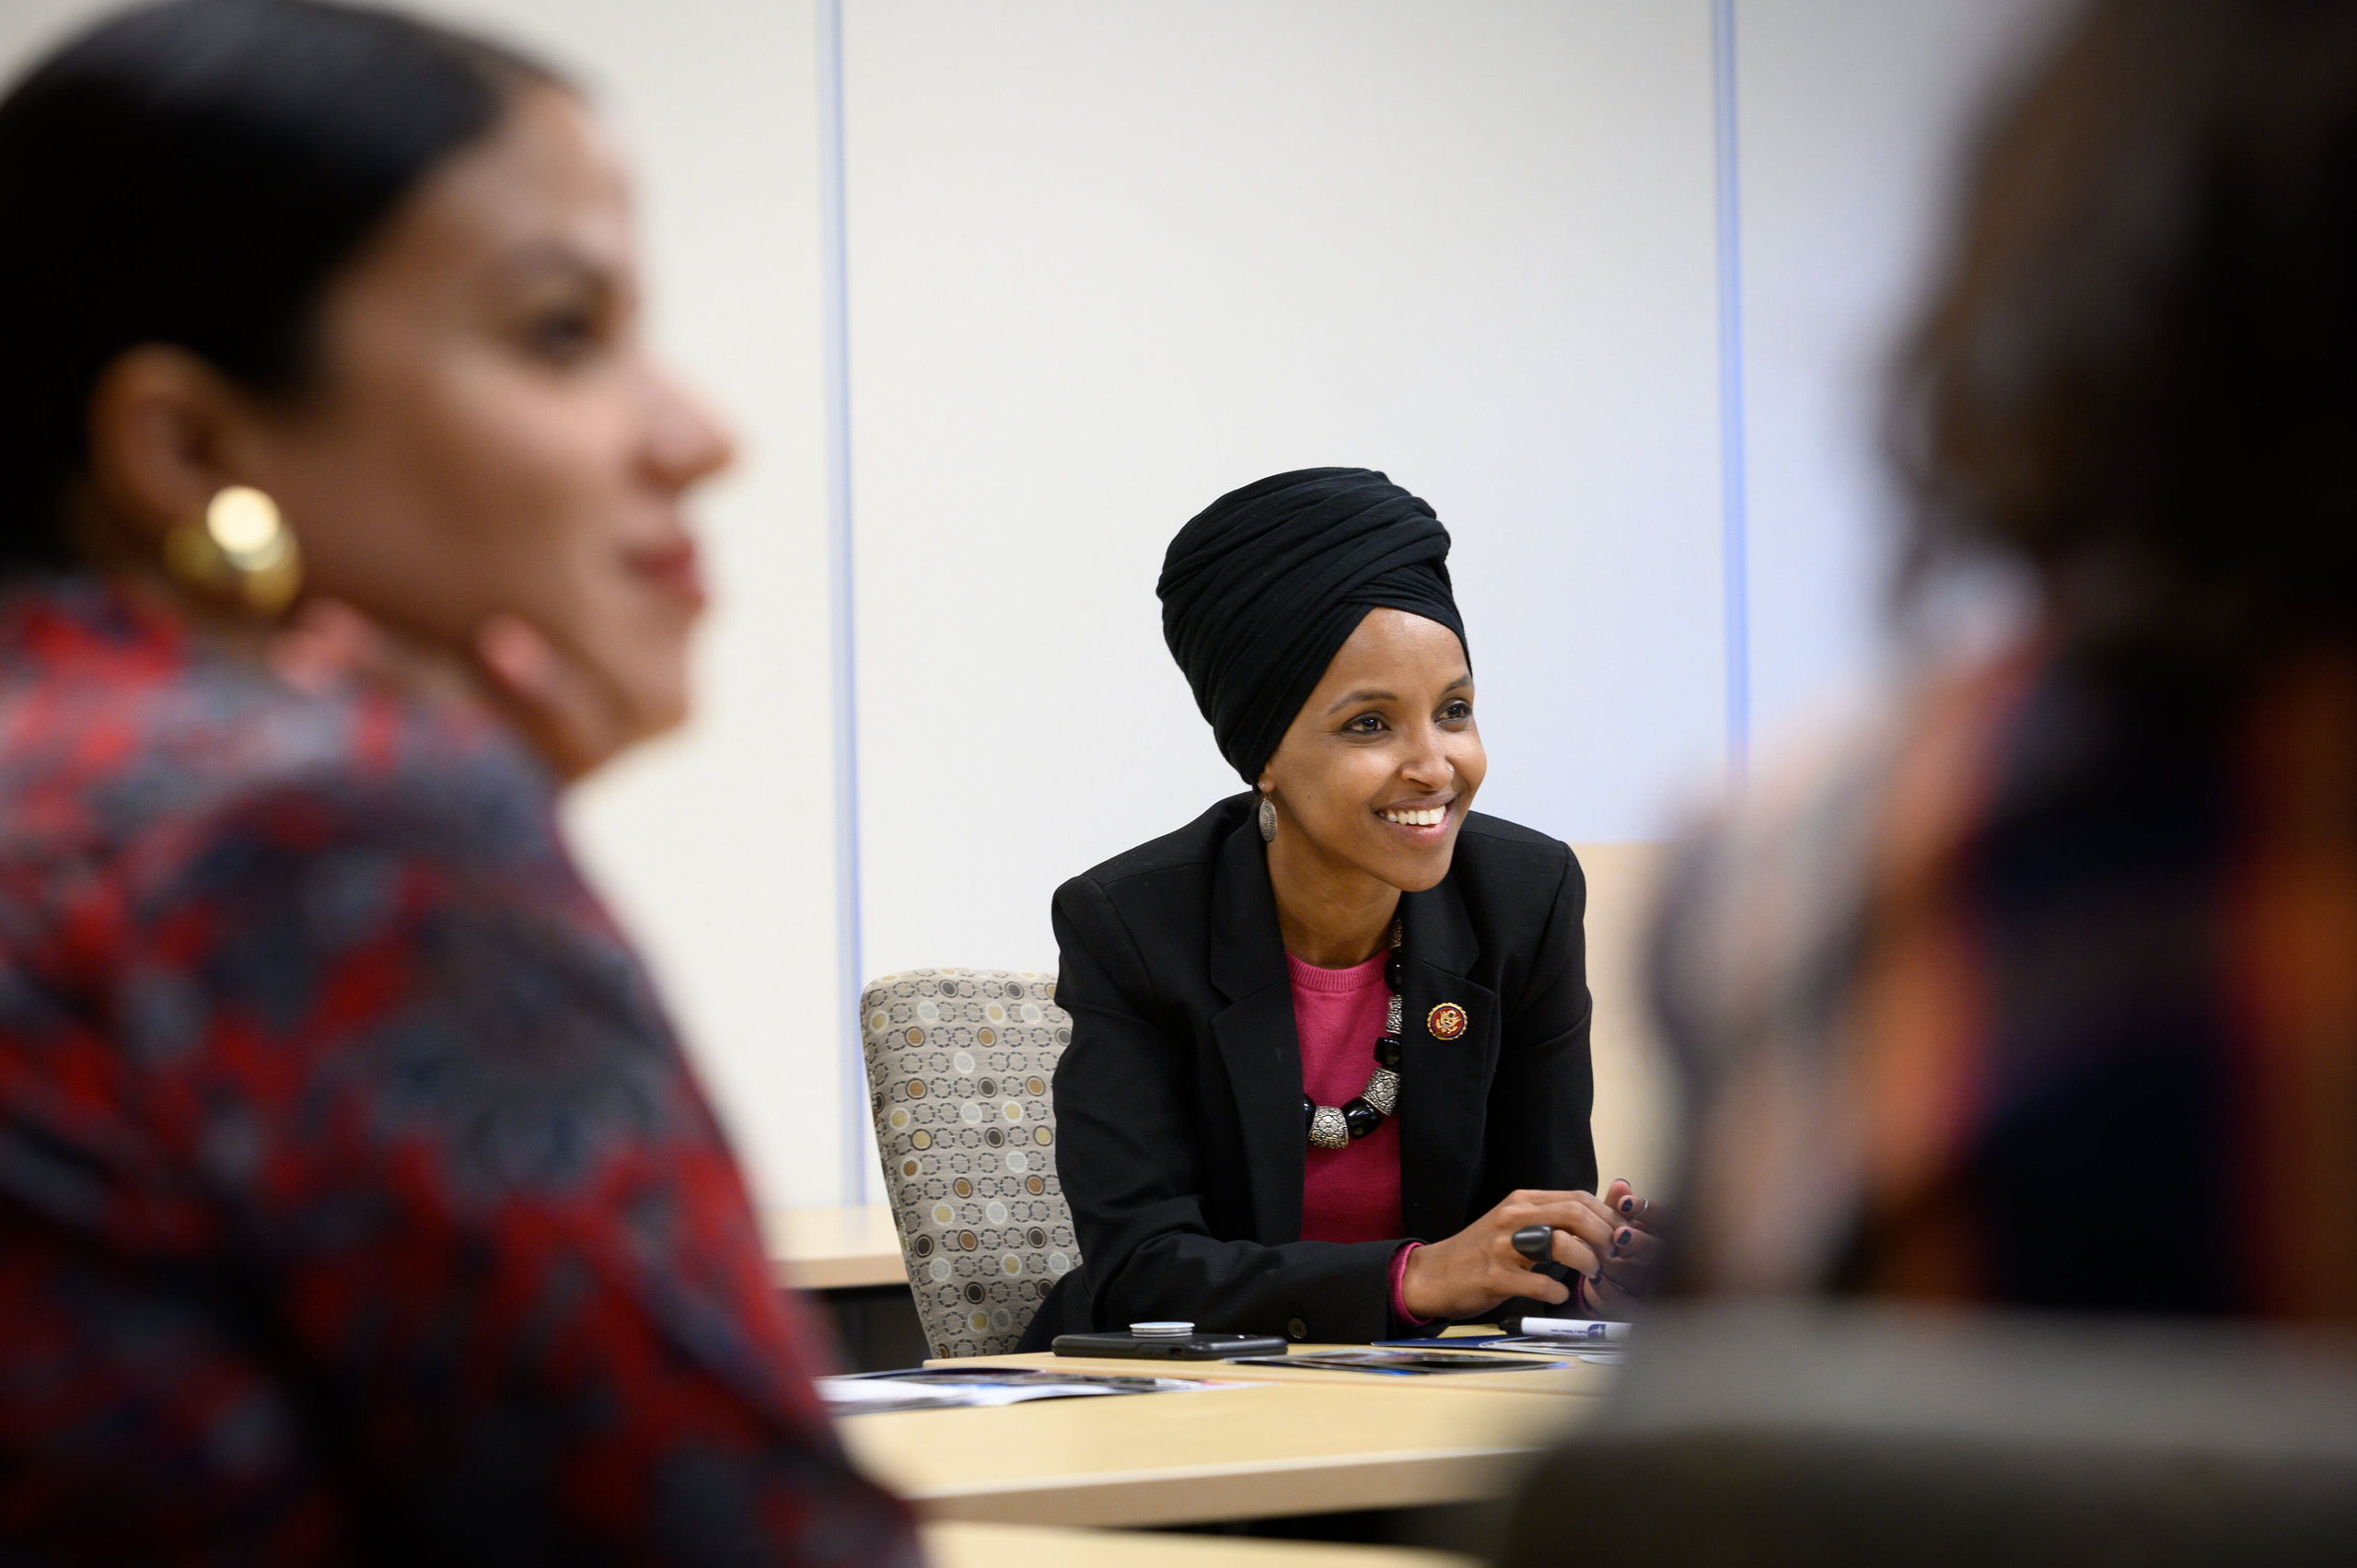 Omar meets with employees of Northpoint Health &amp; Wellness Center in North Minneapolis on April 24, 2019.